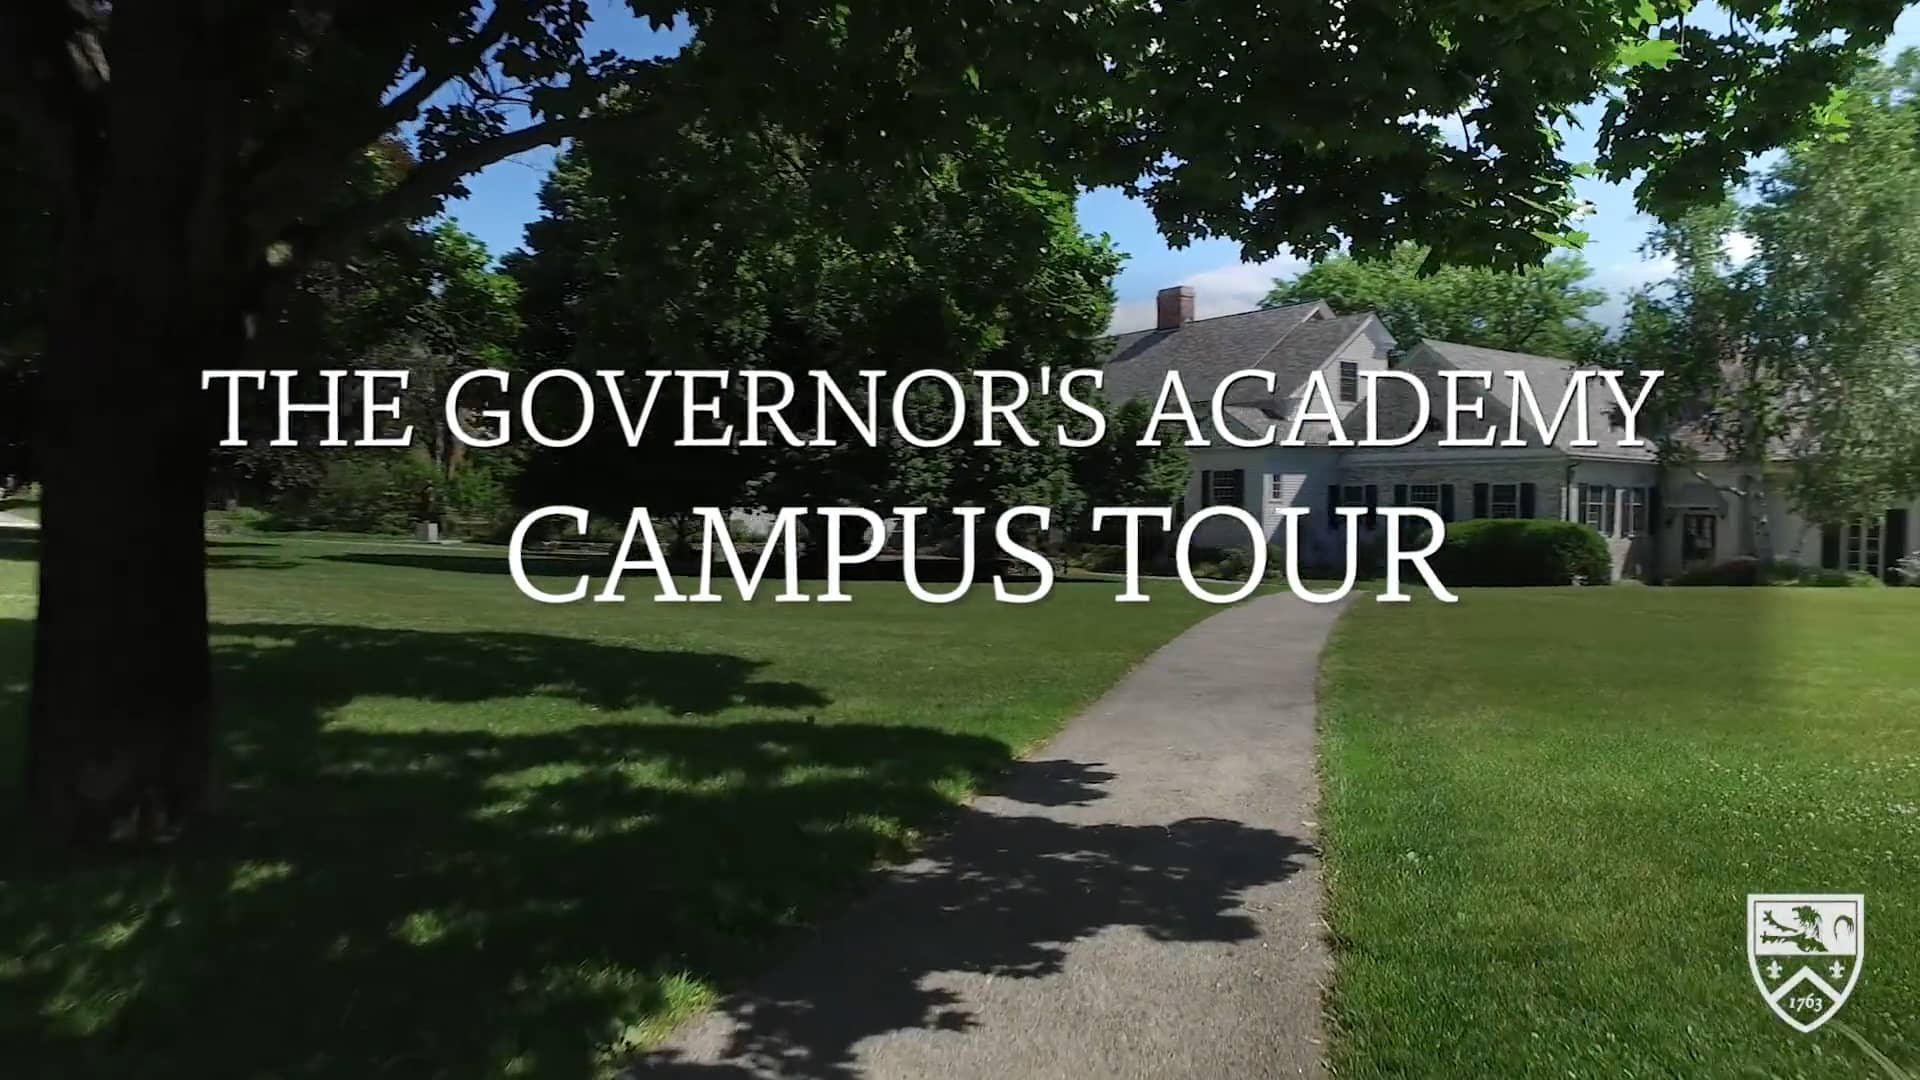 The Governor's Academy Campus Tour on Vimeo